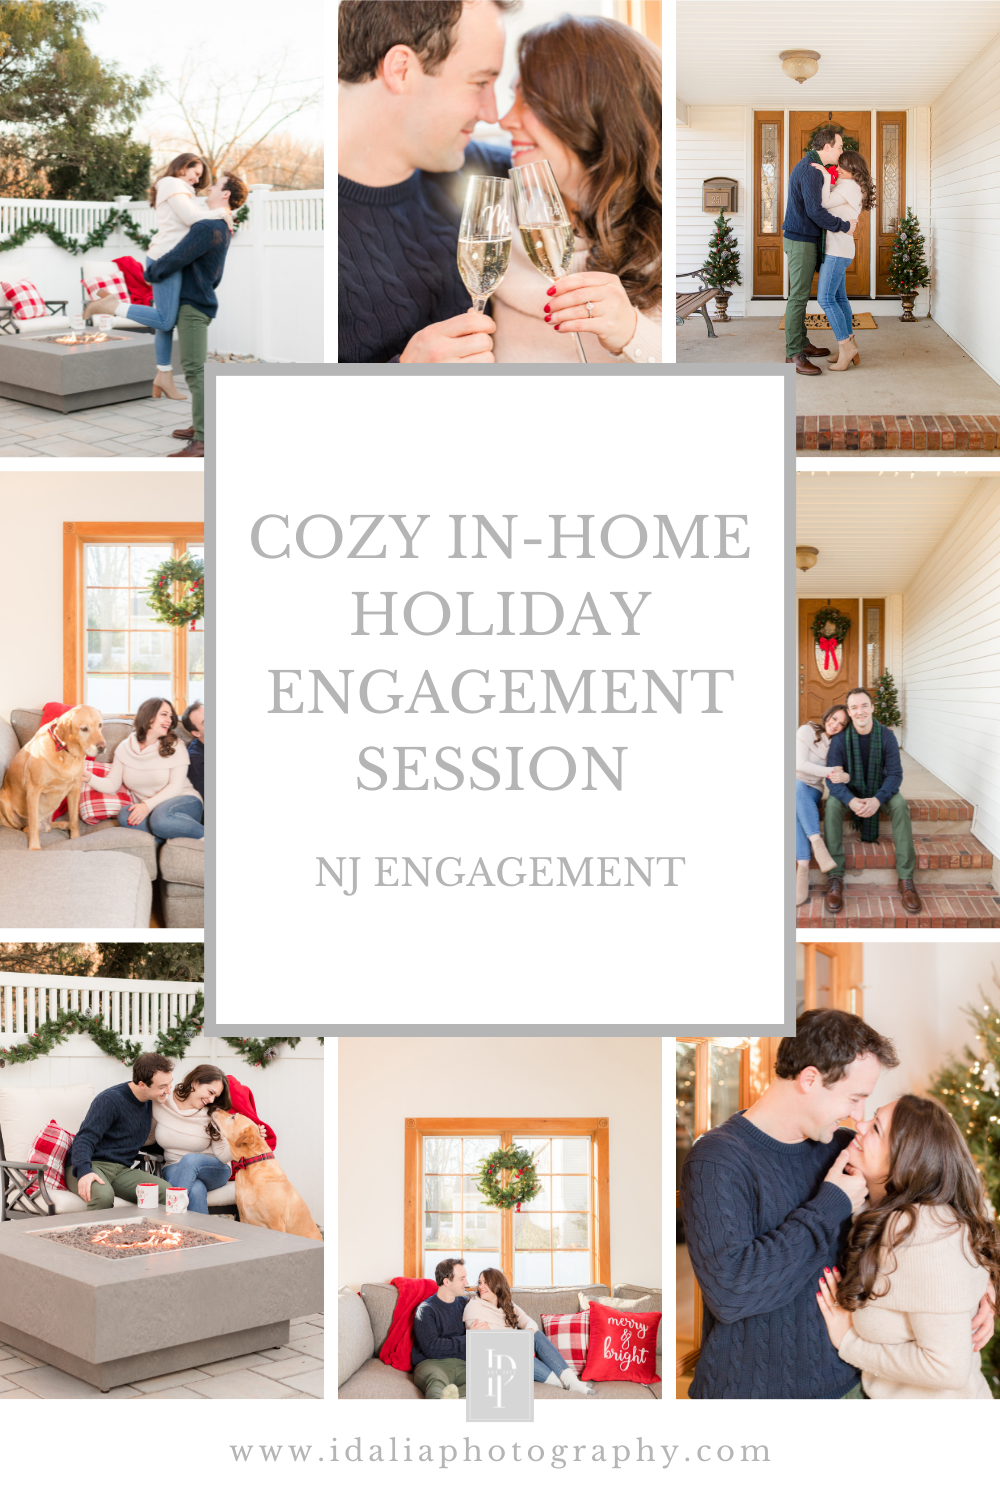 Cozy In-Home Holiday Engagement Session in New Jersey photographed by NJ wedding photographer Idalia Photography.